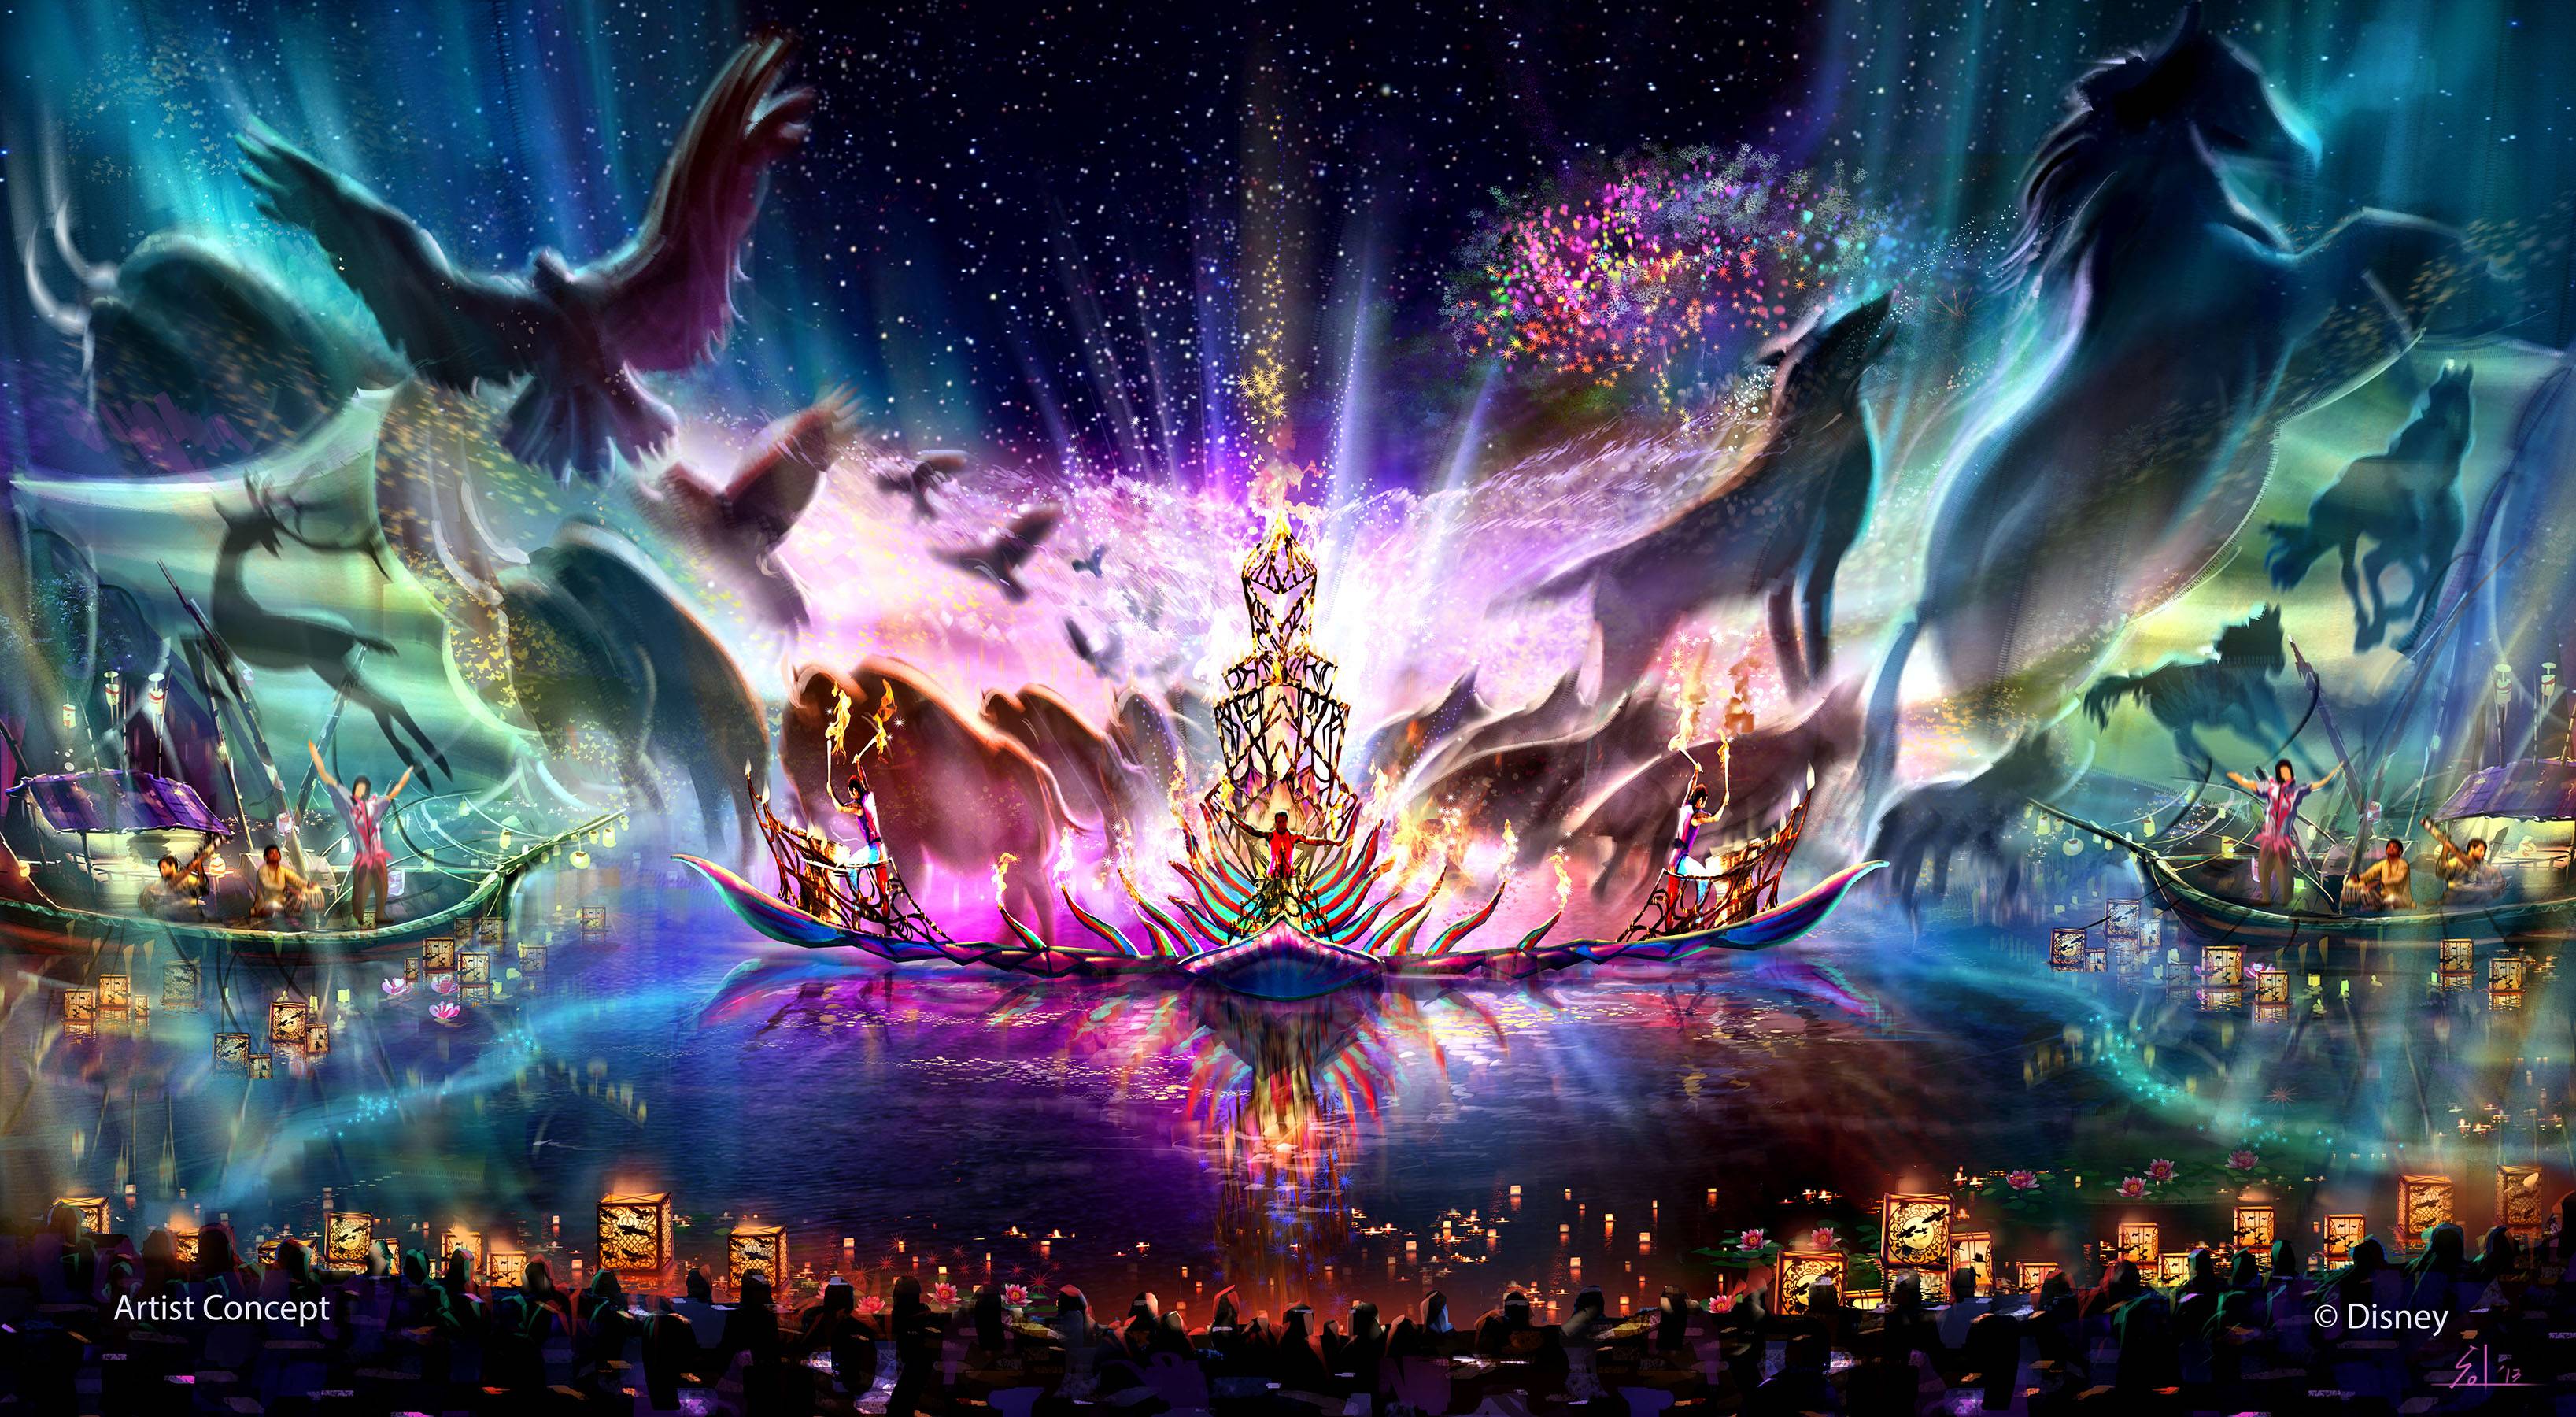 PHOTOS - Concept art revealed for Disney's Animal Kingdom's new nighttime show - 'Rivers of Light'